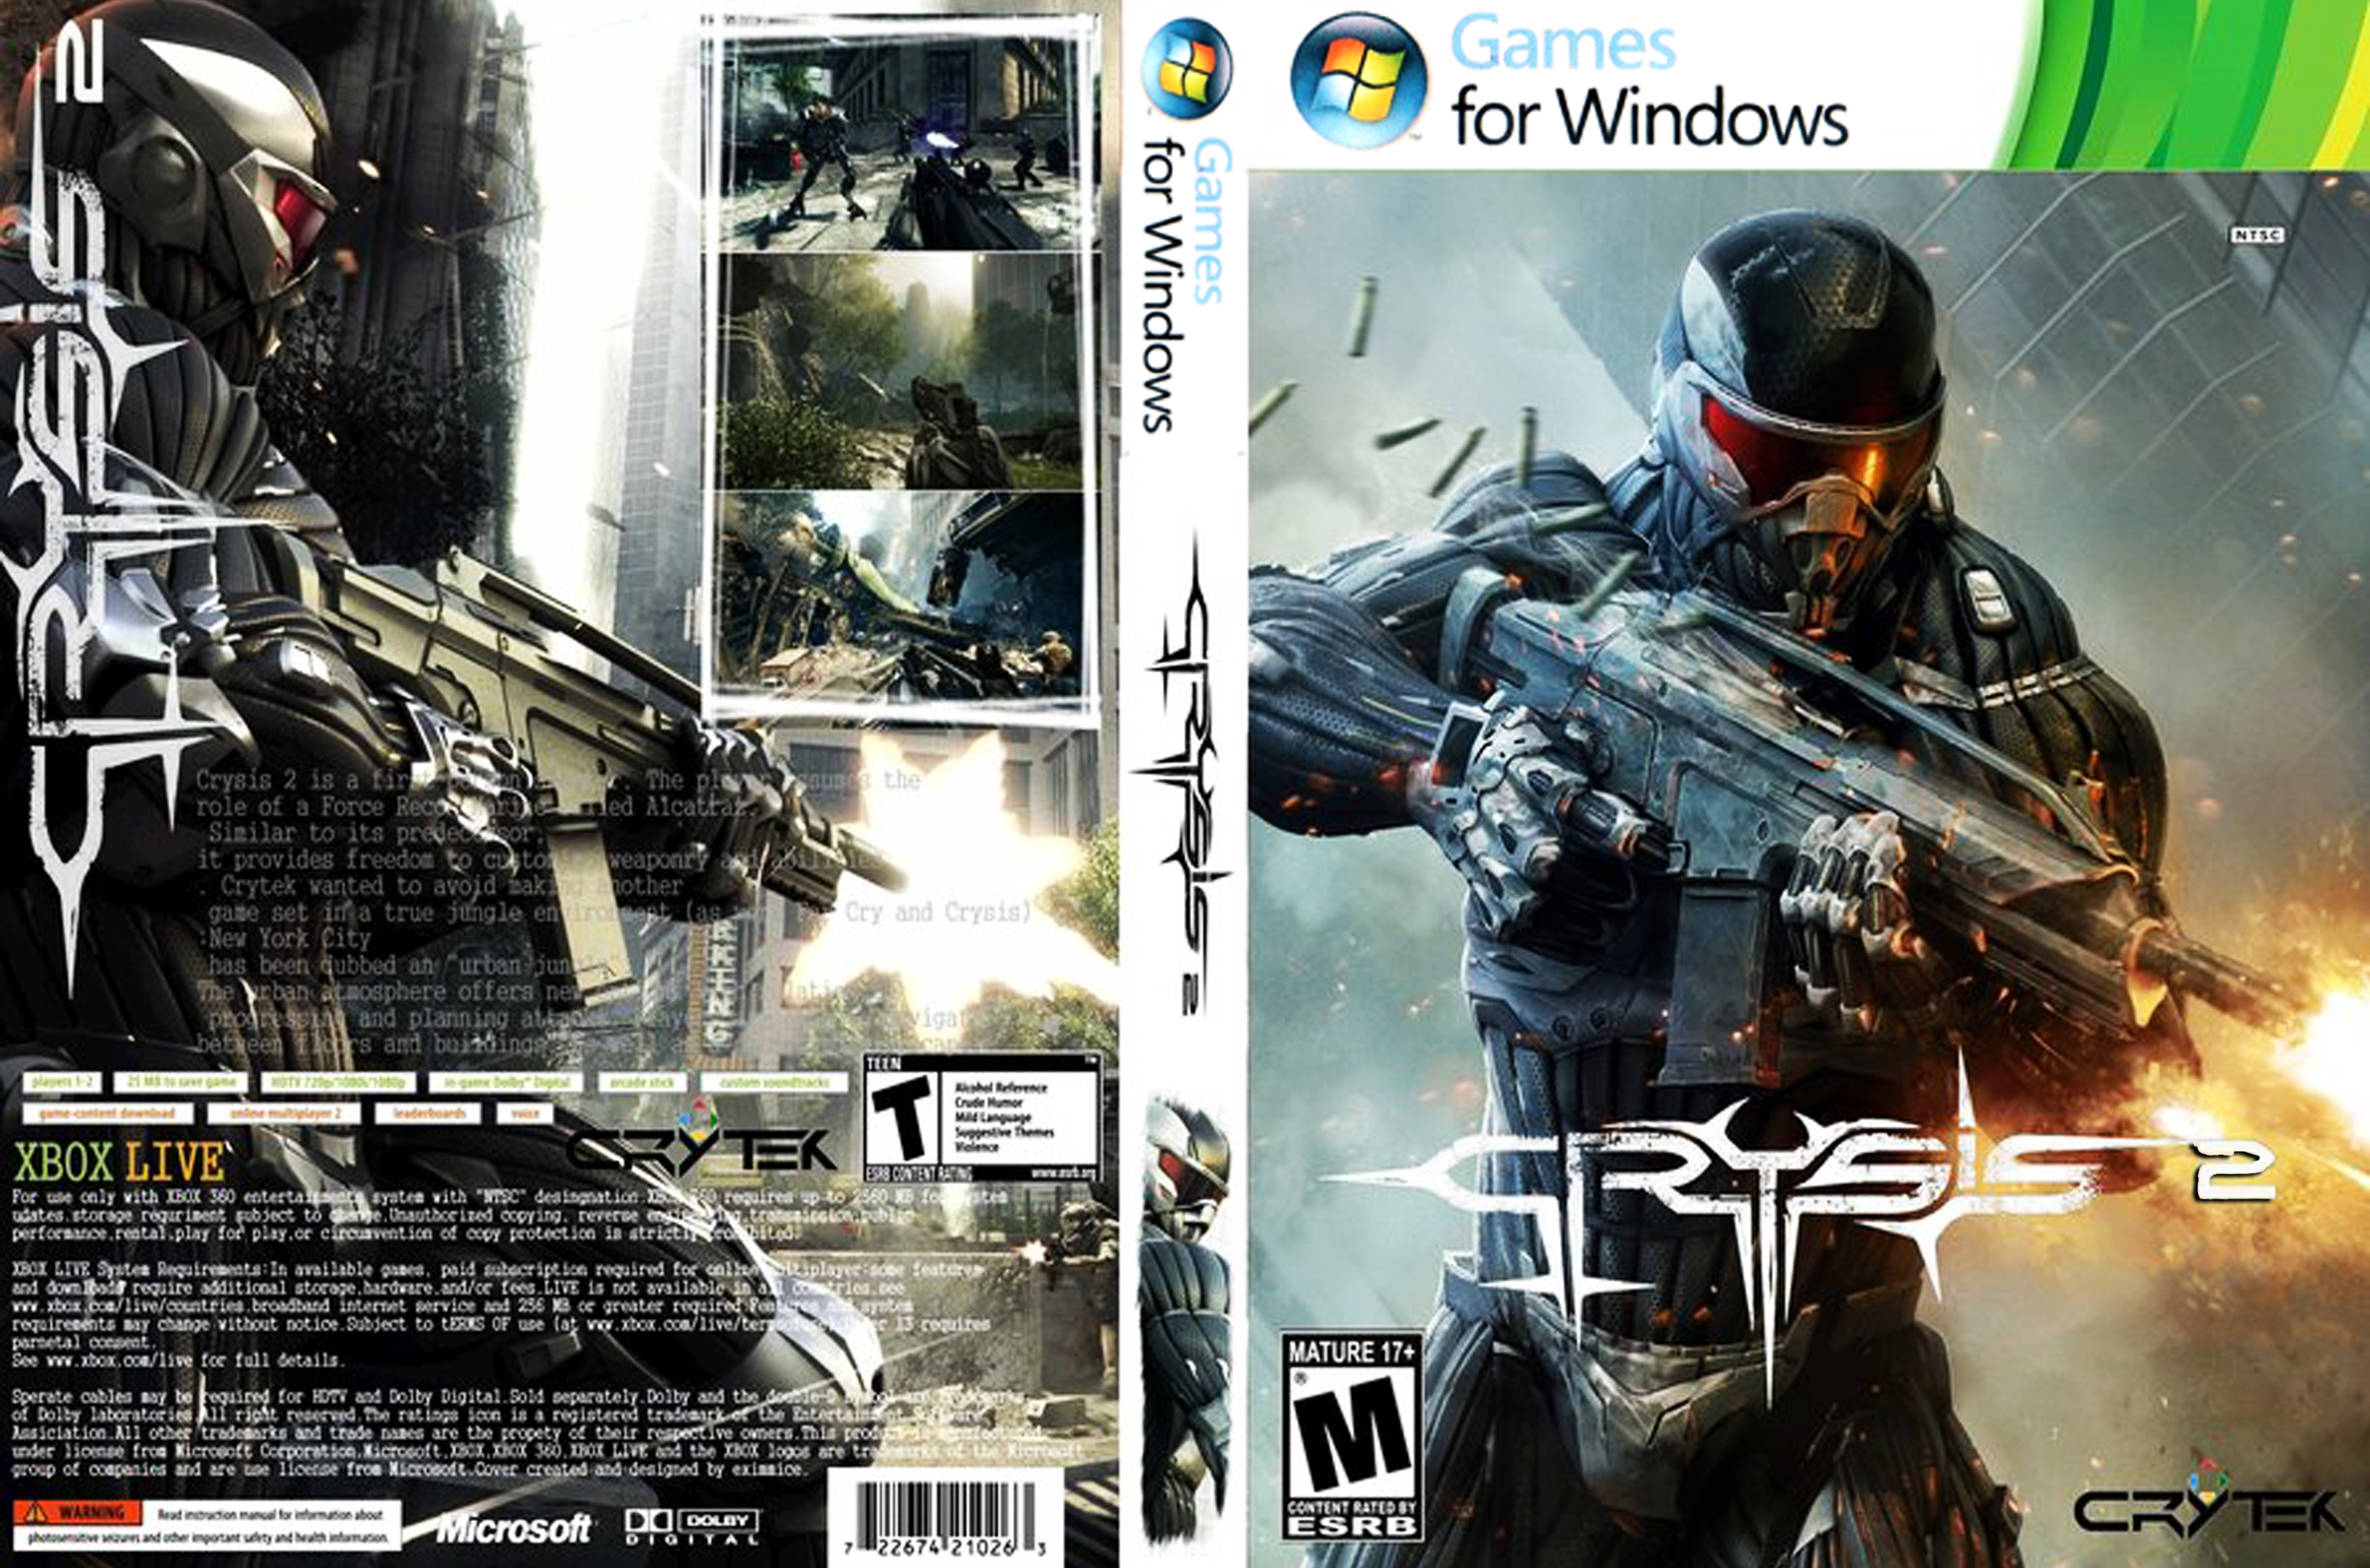 crysis 2 pc maxed out